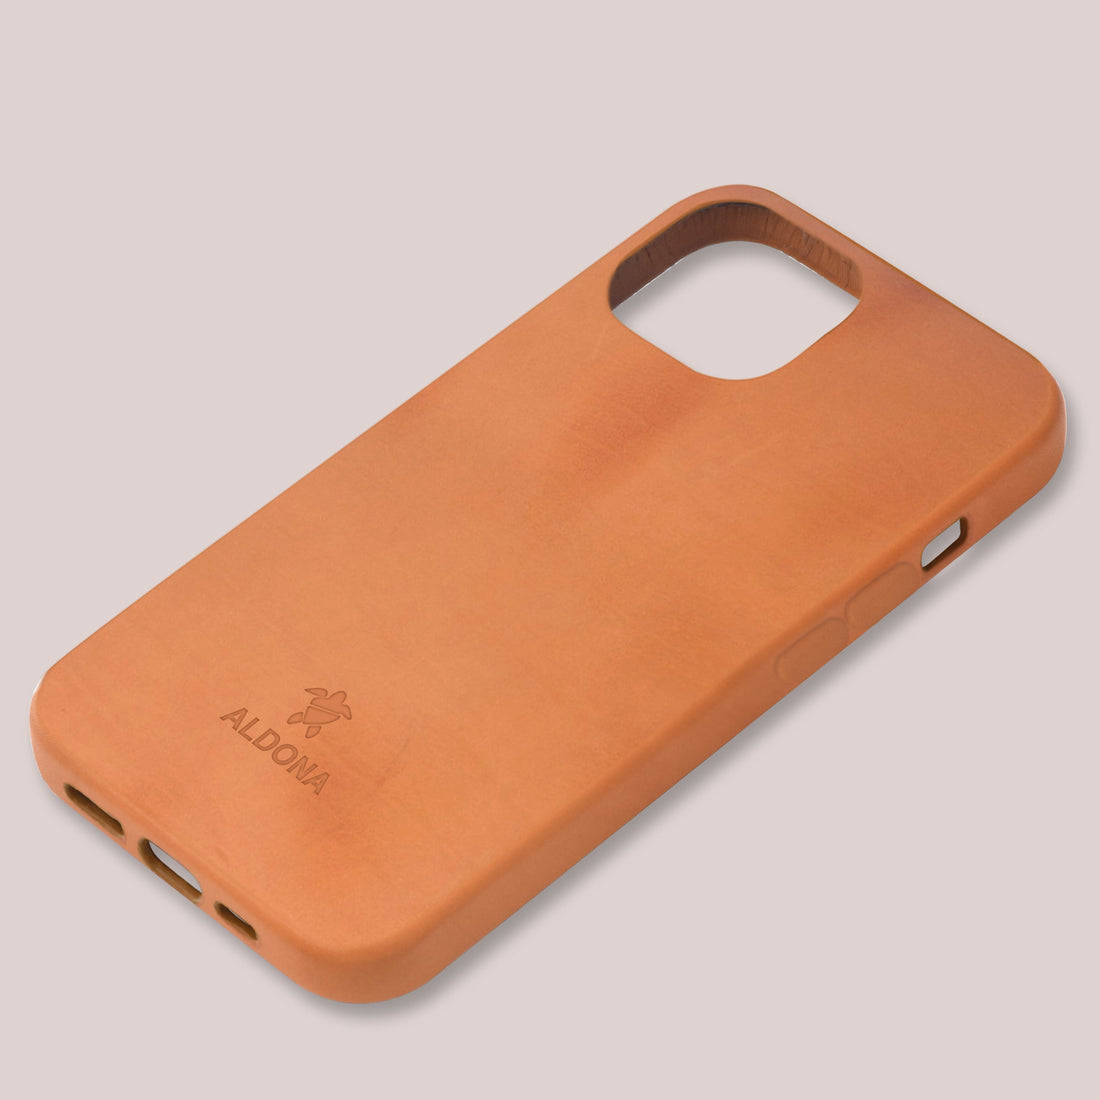 Kalon Case for iPhone 13 series with MagSafe Compatibility - Dark Soil